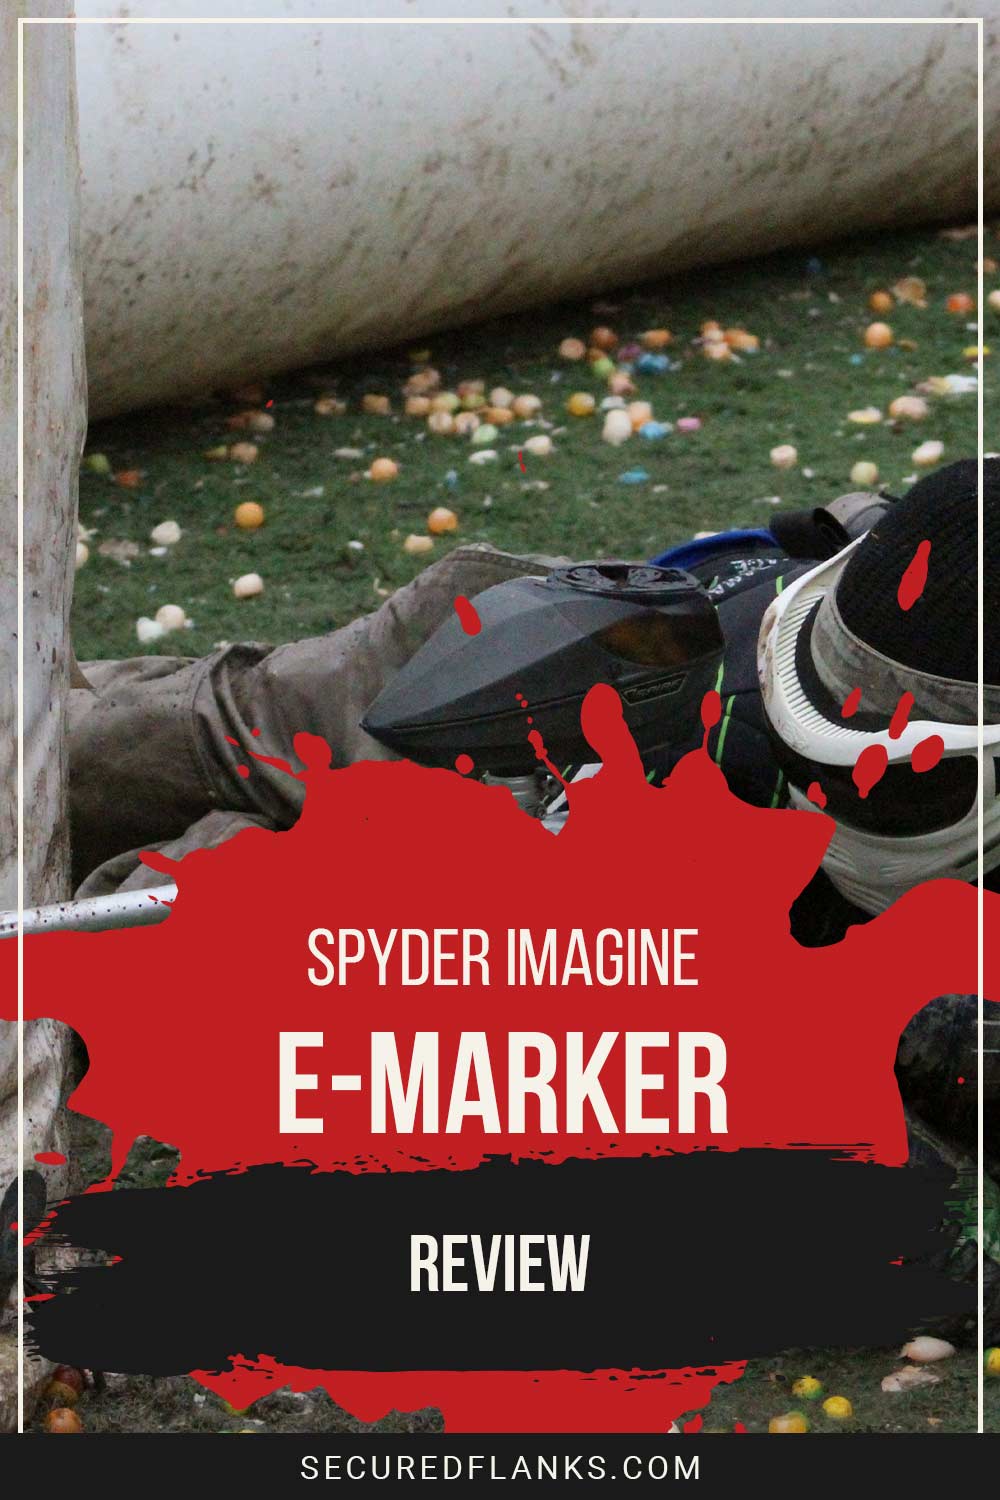 Paintball gun in a person's hand - Spyder Imagine e-Marker review.